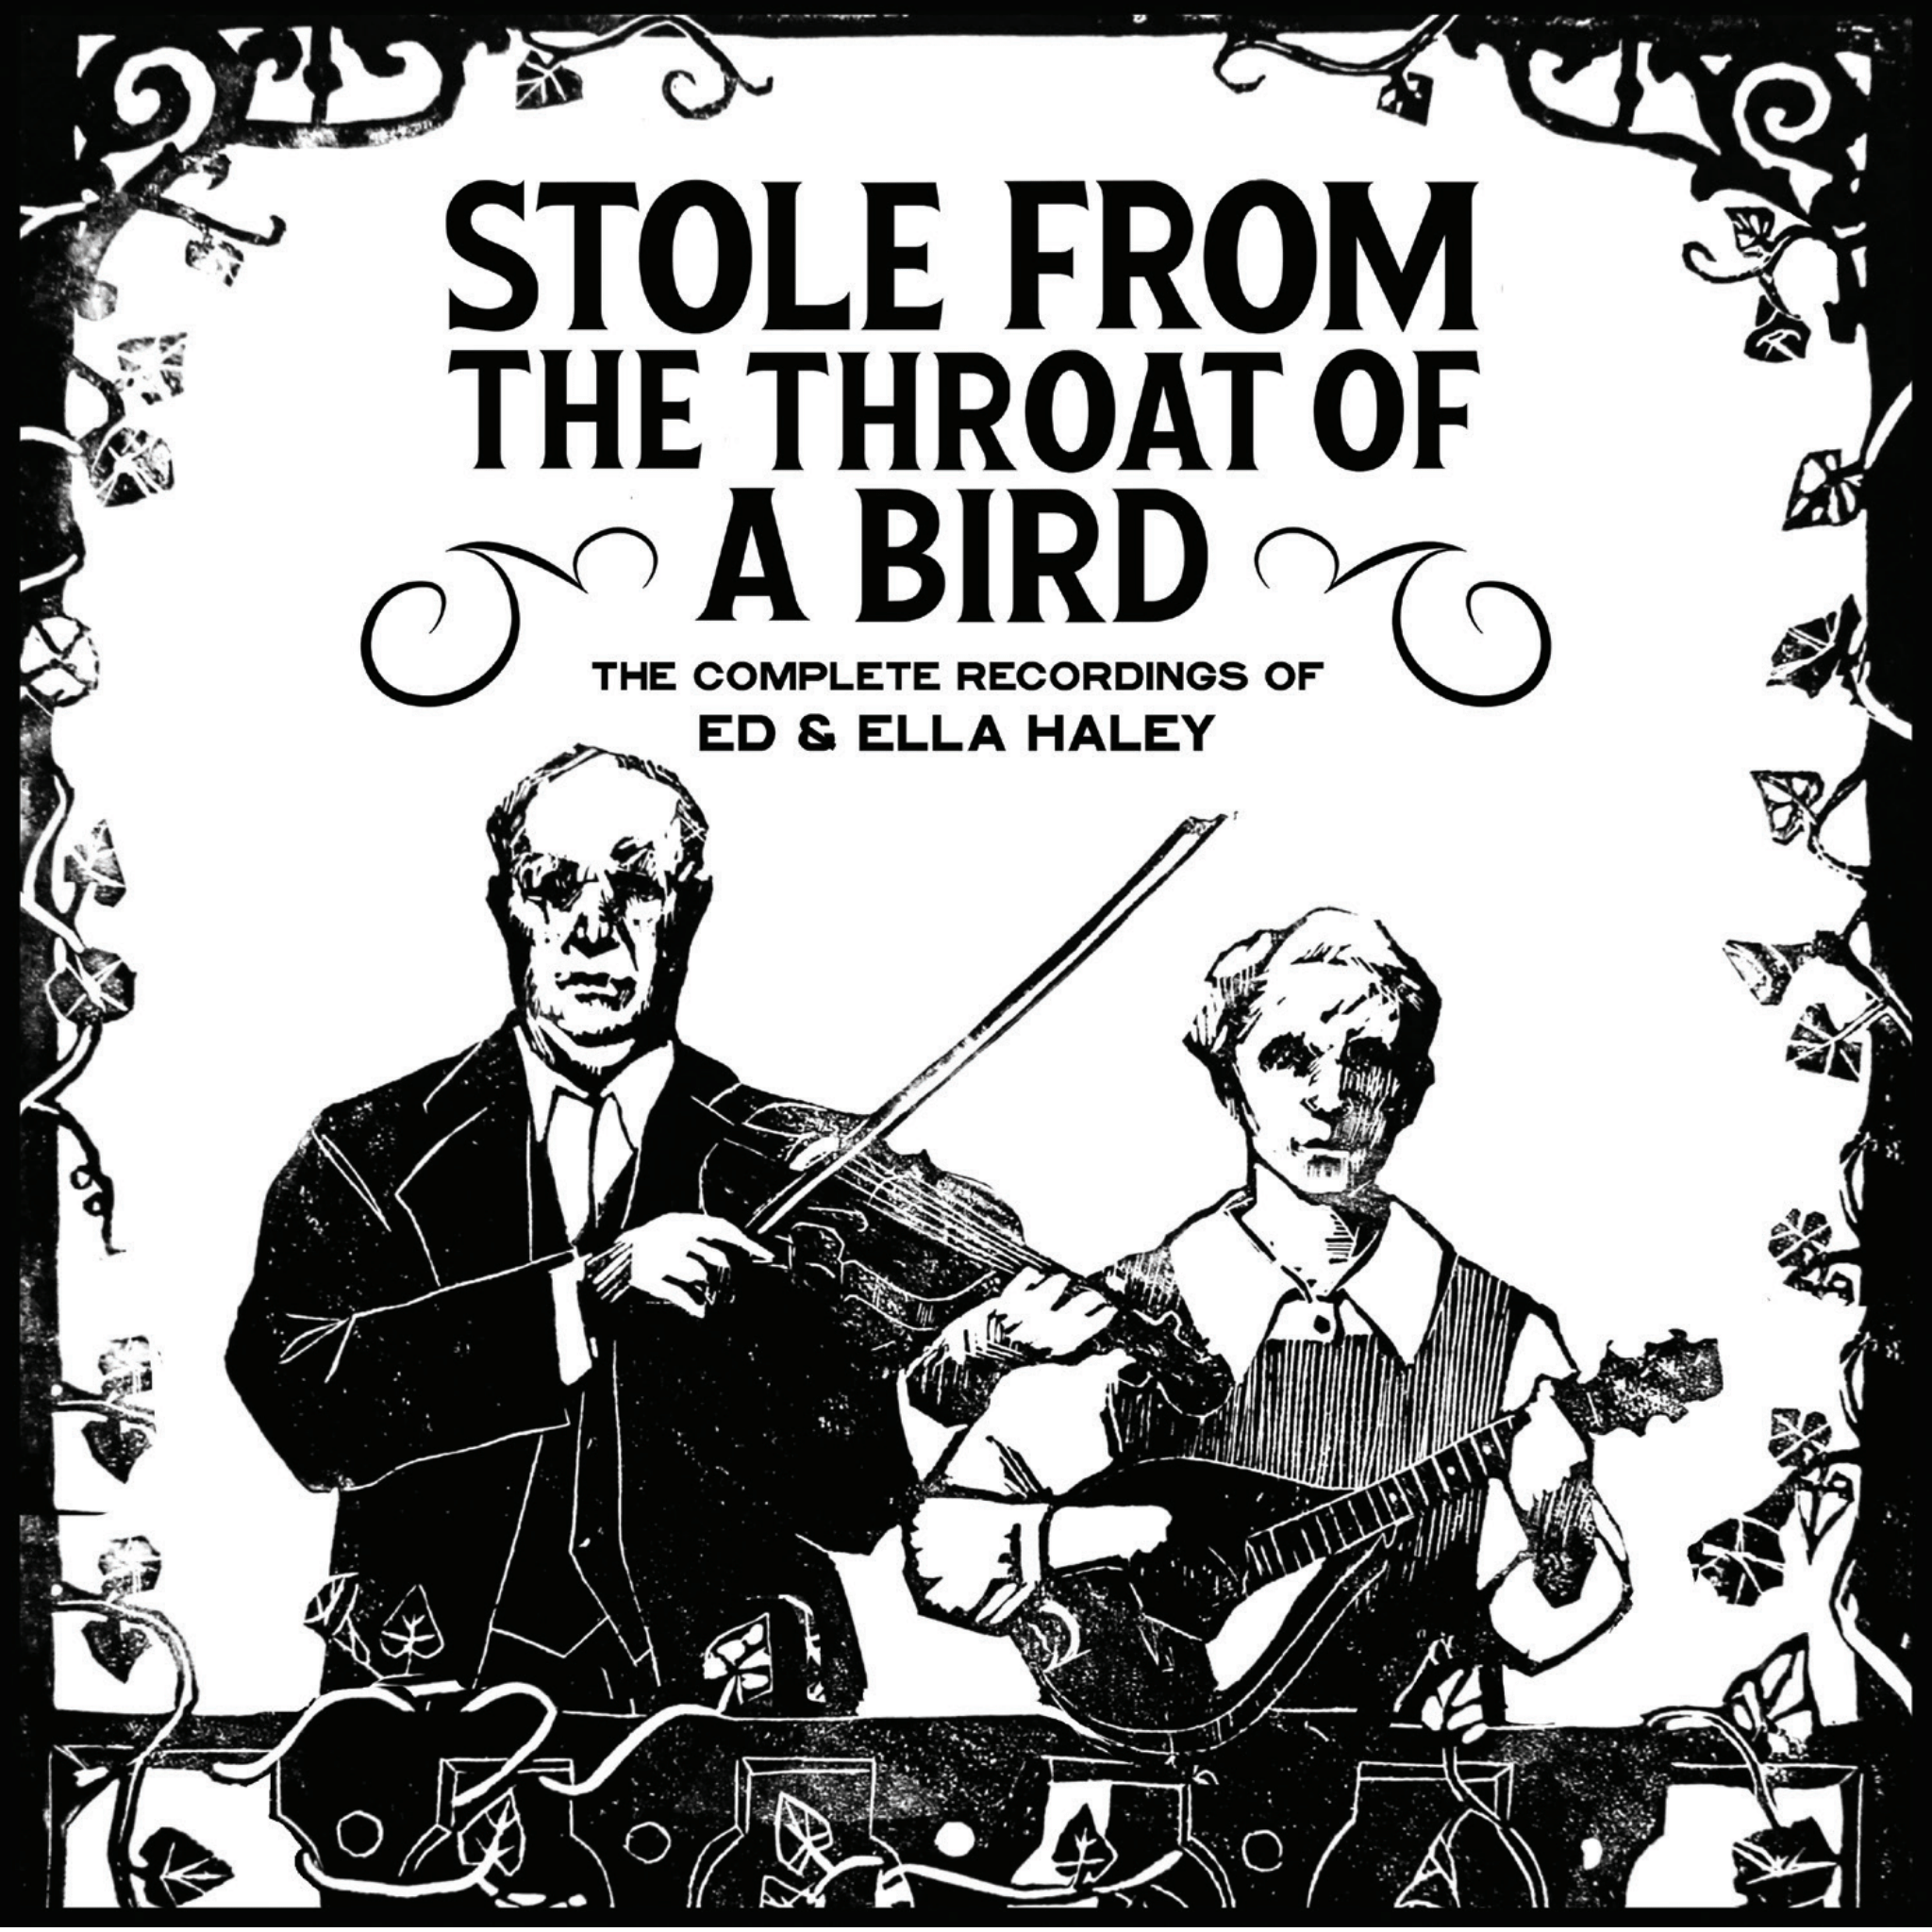 Black and white illustrative design of a man and a woman on a white background. Large black text above the two people reads, "Stole from the throat of a bird"